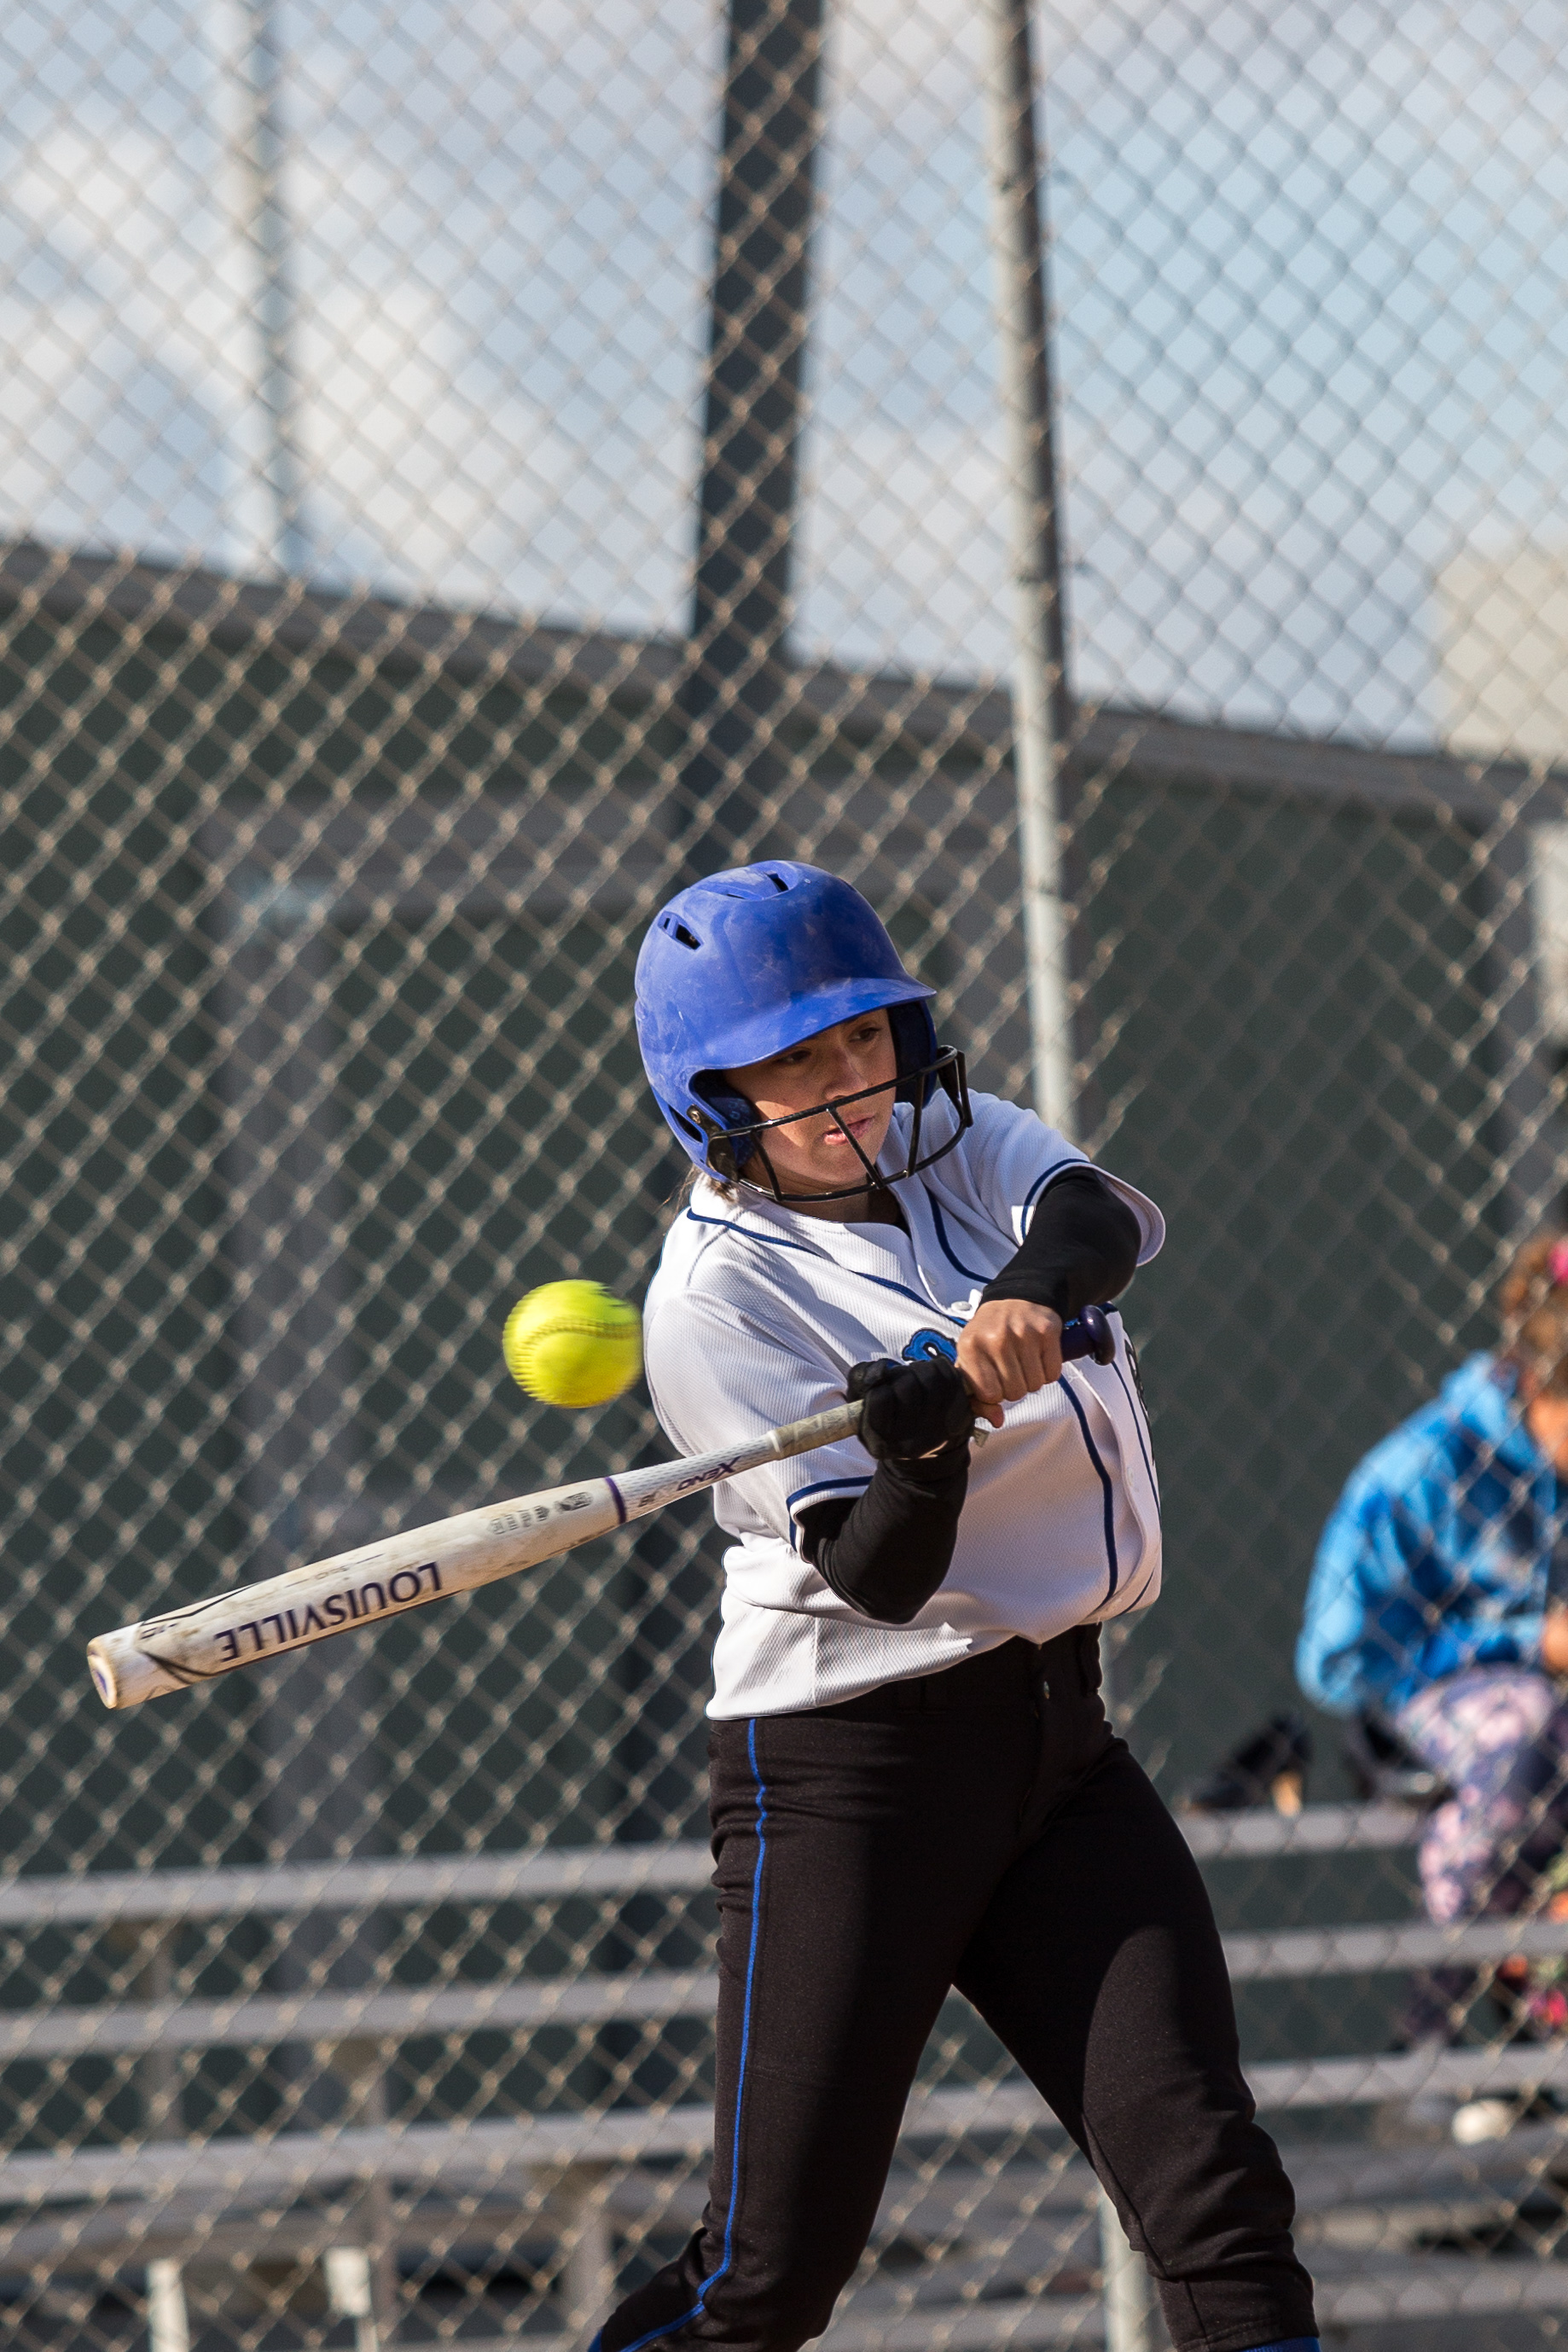  Santa Monica College Corsair freshman outfielder Aliza Chacon (#24, white) hits a single at the bottom of the 3rd at the Corsair Field in Santa Monica California, on Tuesday, February 27 2018. The Corsairs would go on to lose the game 0-14 against t